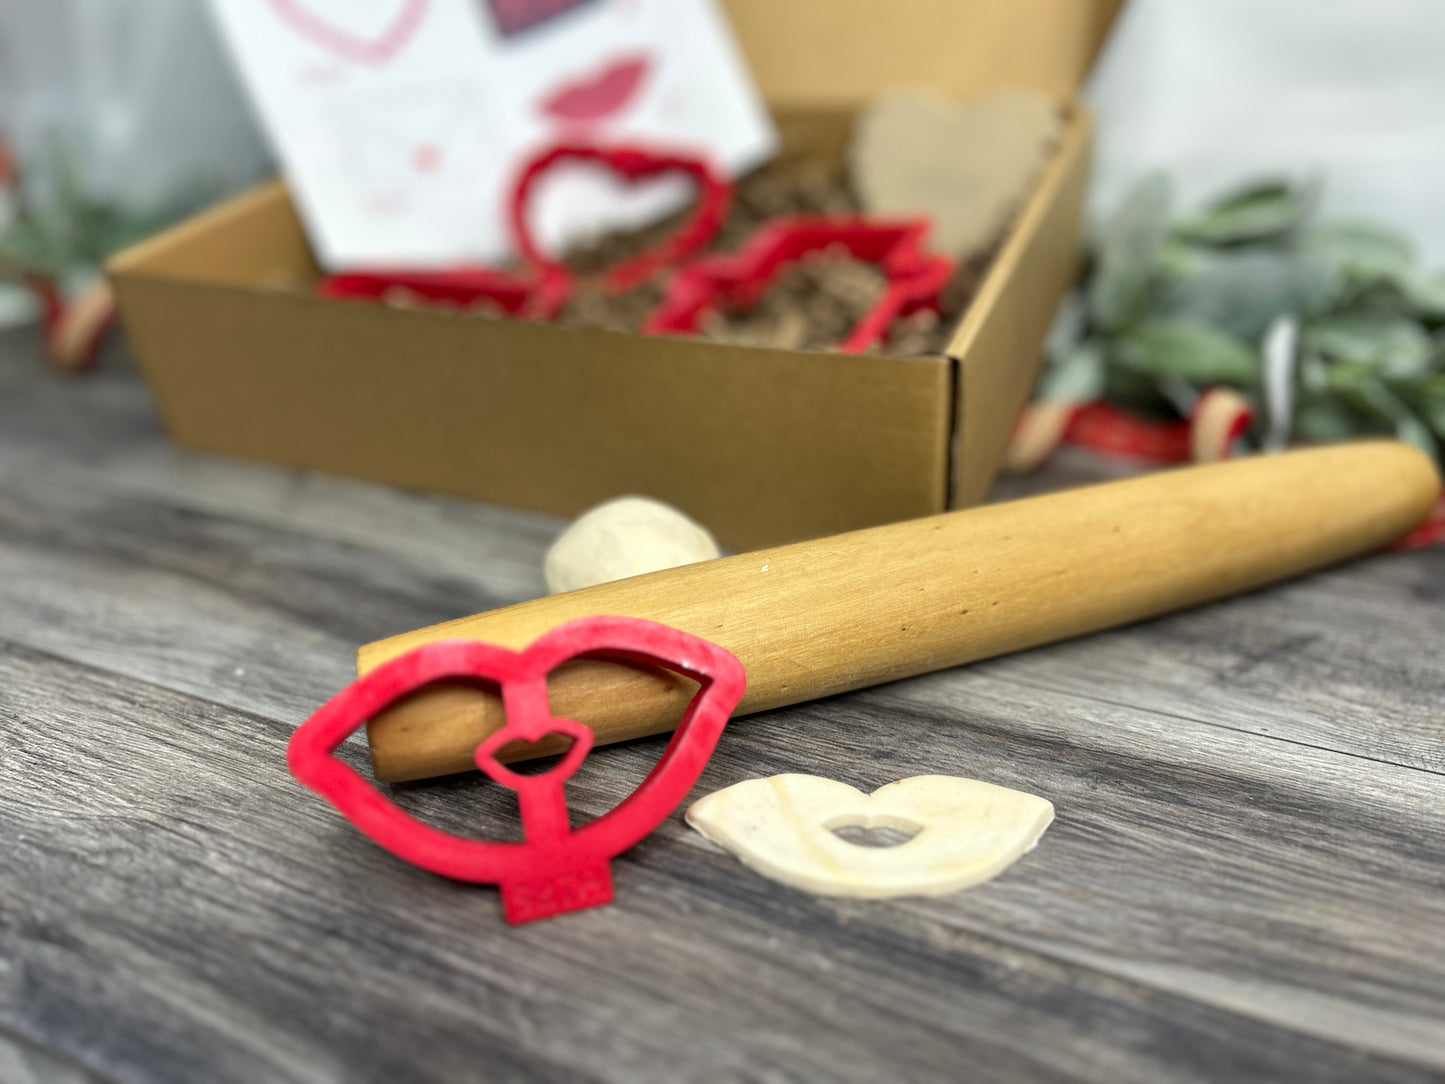 Cookie POP! - Cookie Cutter Subscription Box Membership (Quarterly)